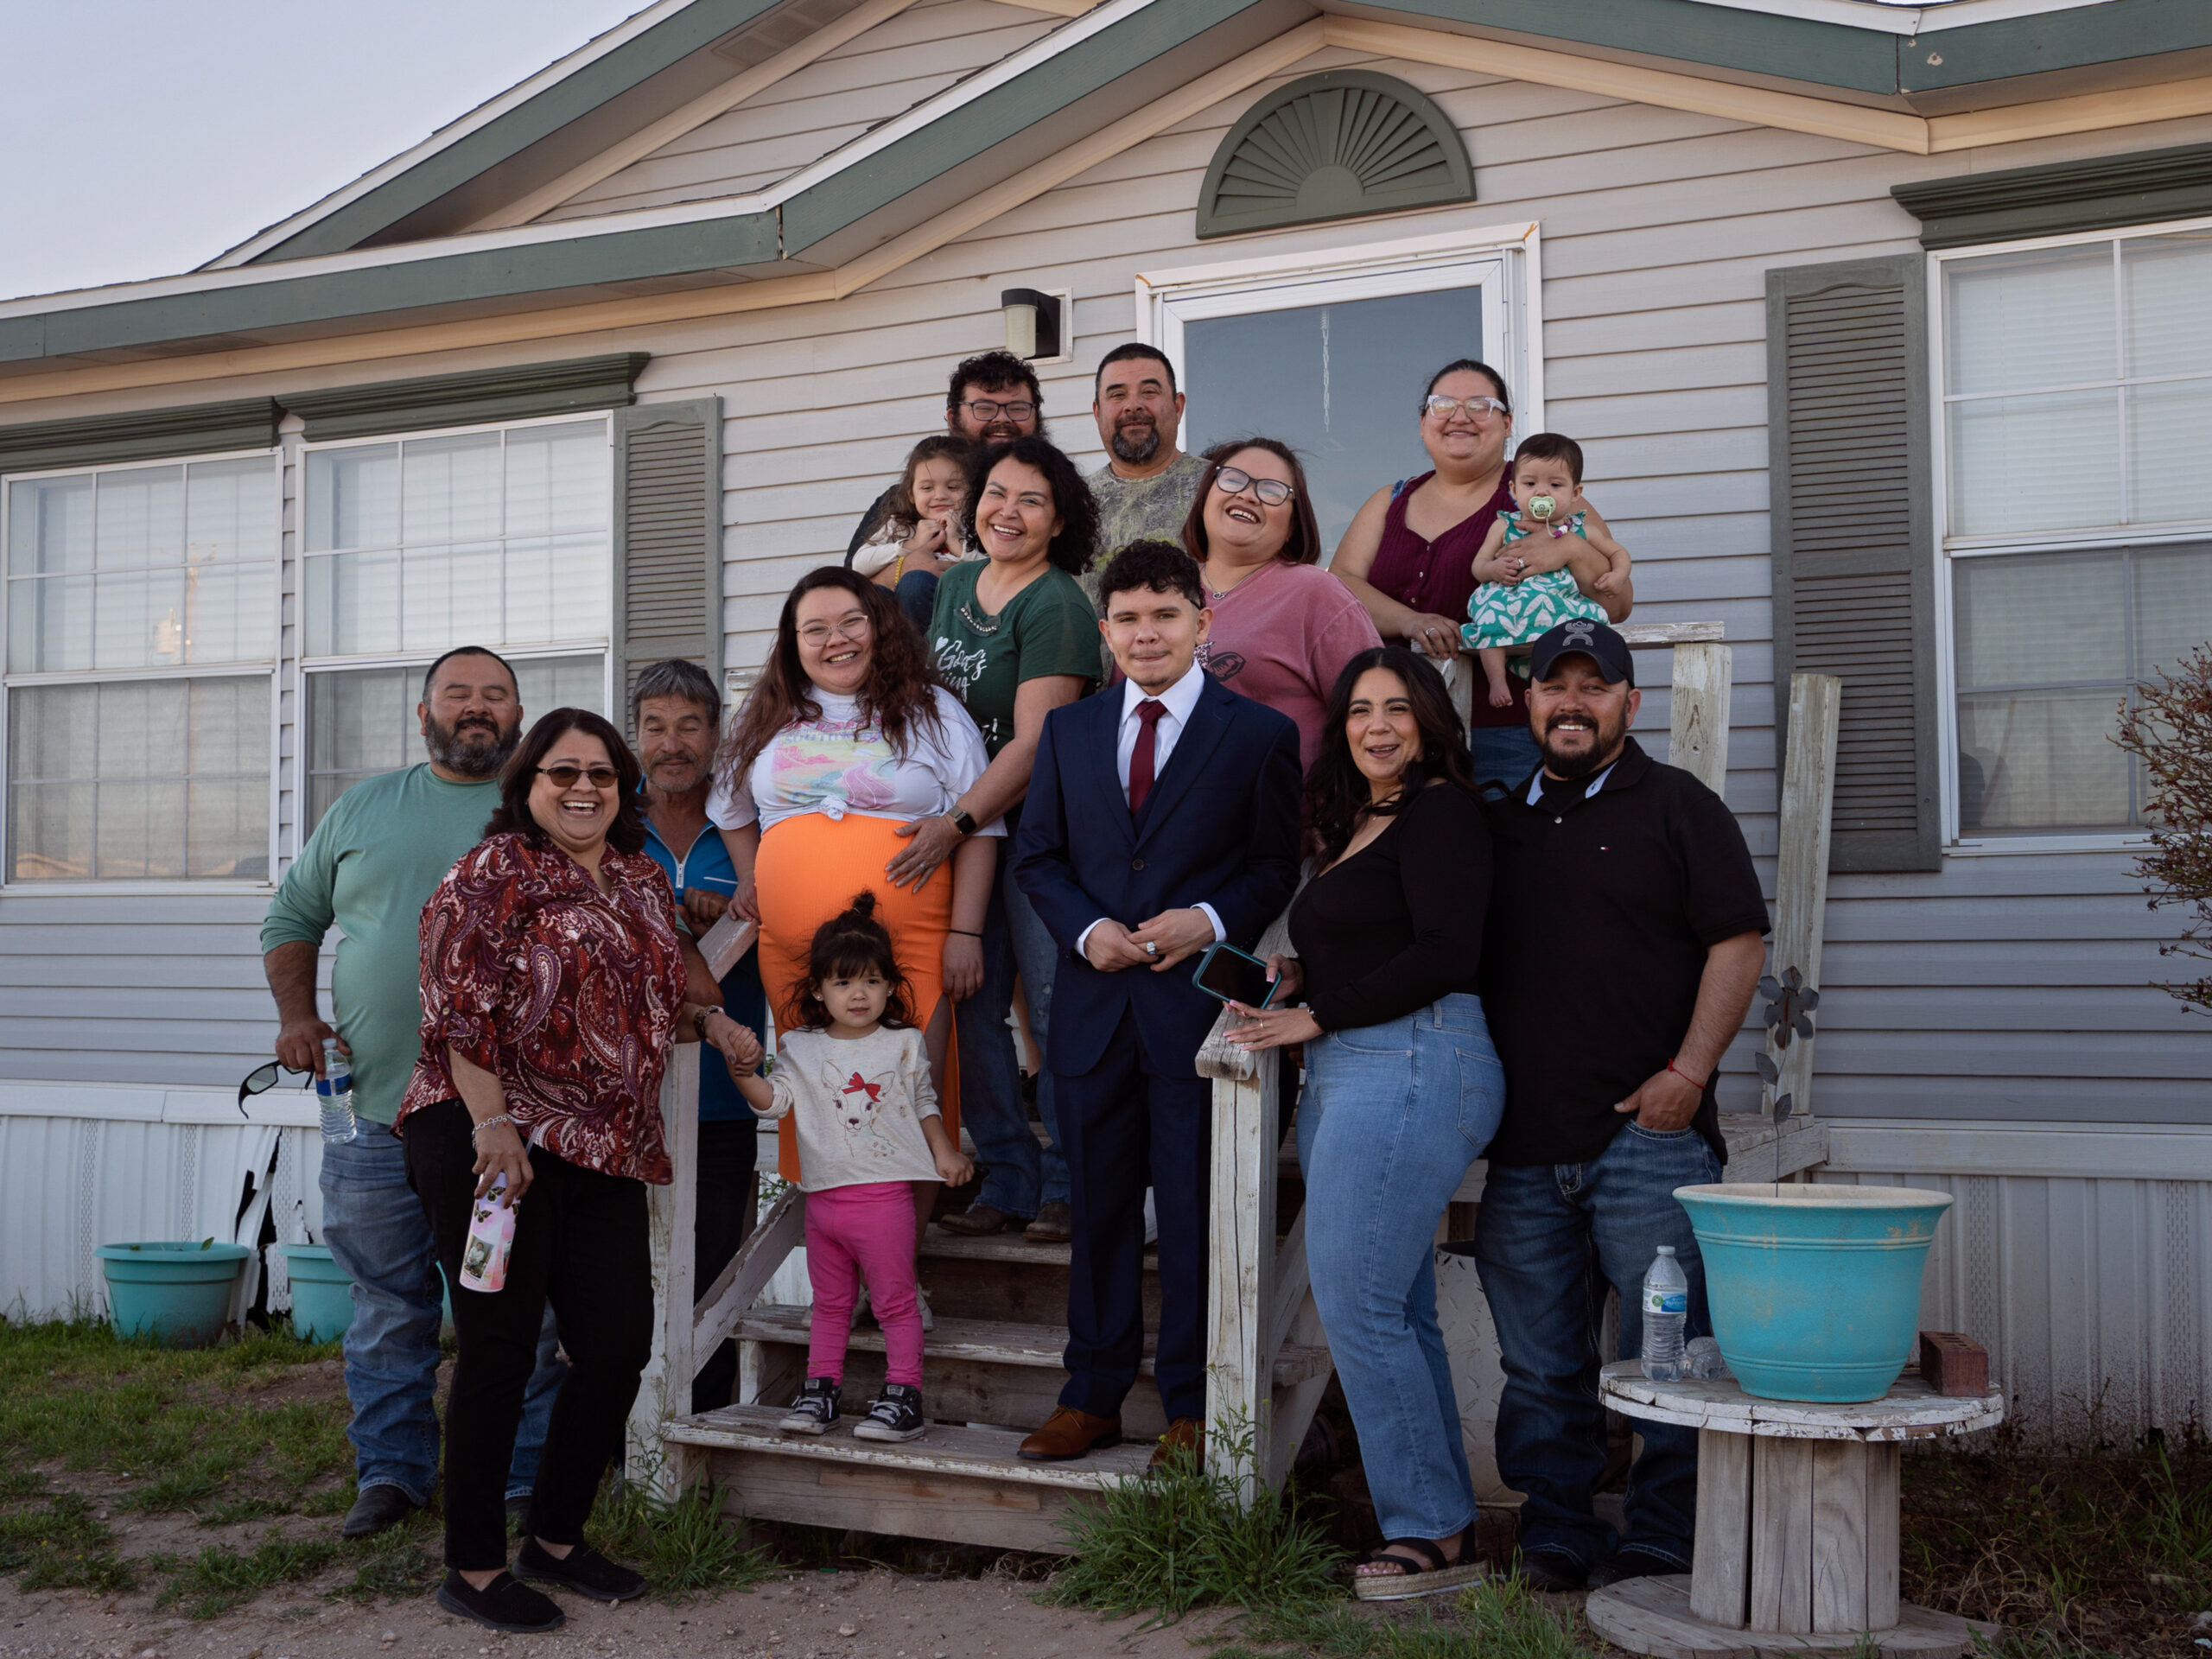 Caitlynn Almance, in the orange skirt, poses for a portrait with family members at her parents' home in Odessa, Texas. "The bond my siblings have with each other – it's just the most beautiful bond ever," says Caitlynn, who is six months pregnant in this photo taken in early March.